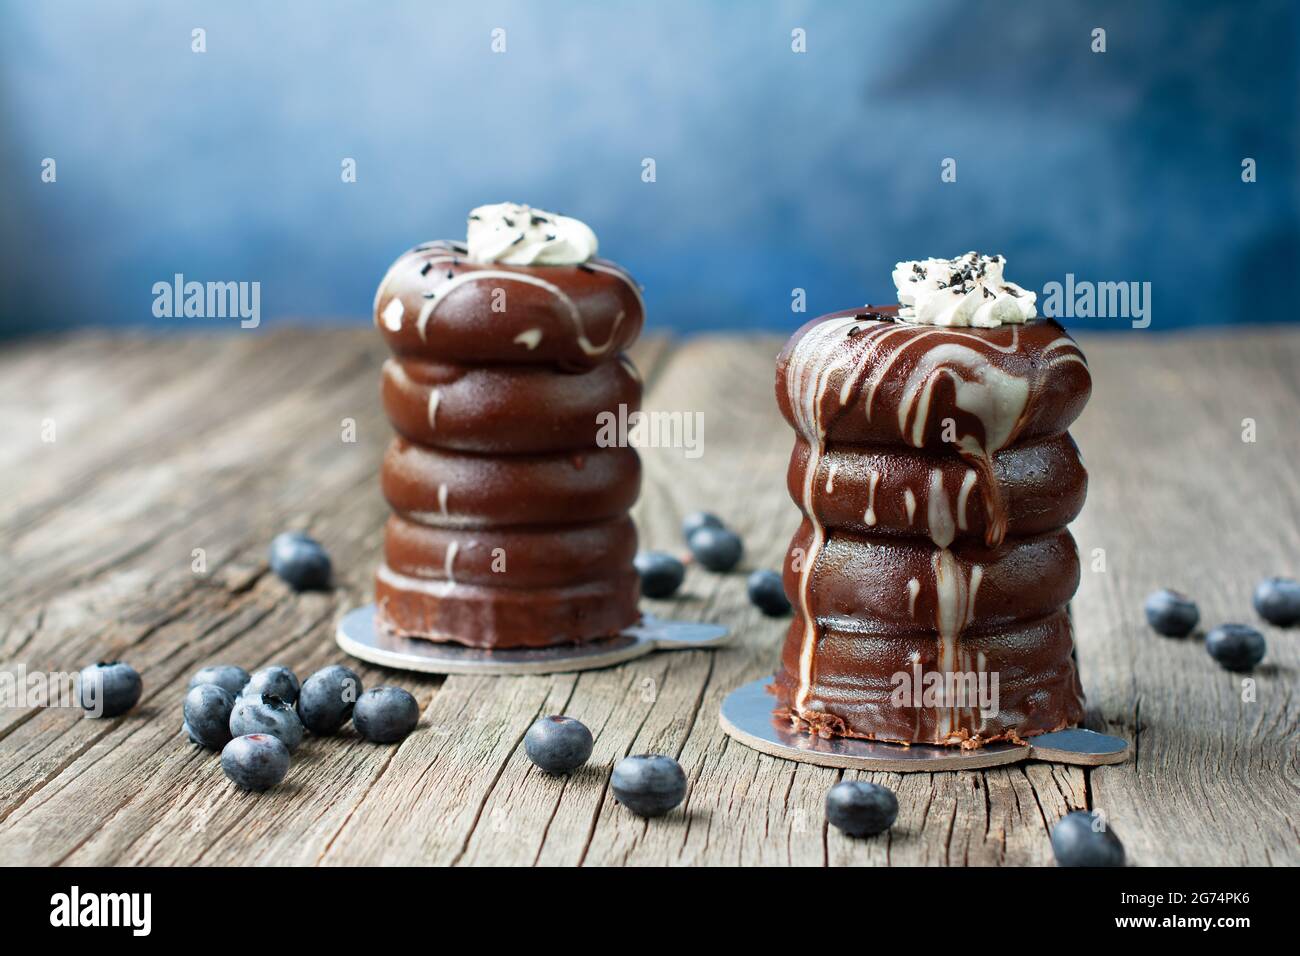 Egg cakes with chocolate glaze, topped with whipped cream, decorated with chocolate sprinkles. Blueberries are scattered on the weathered wood planks. Stock Photo